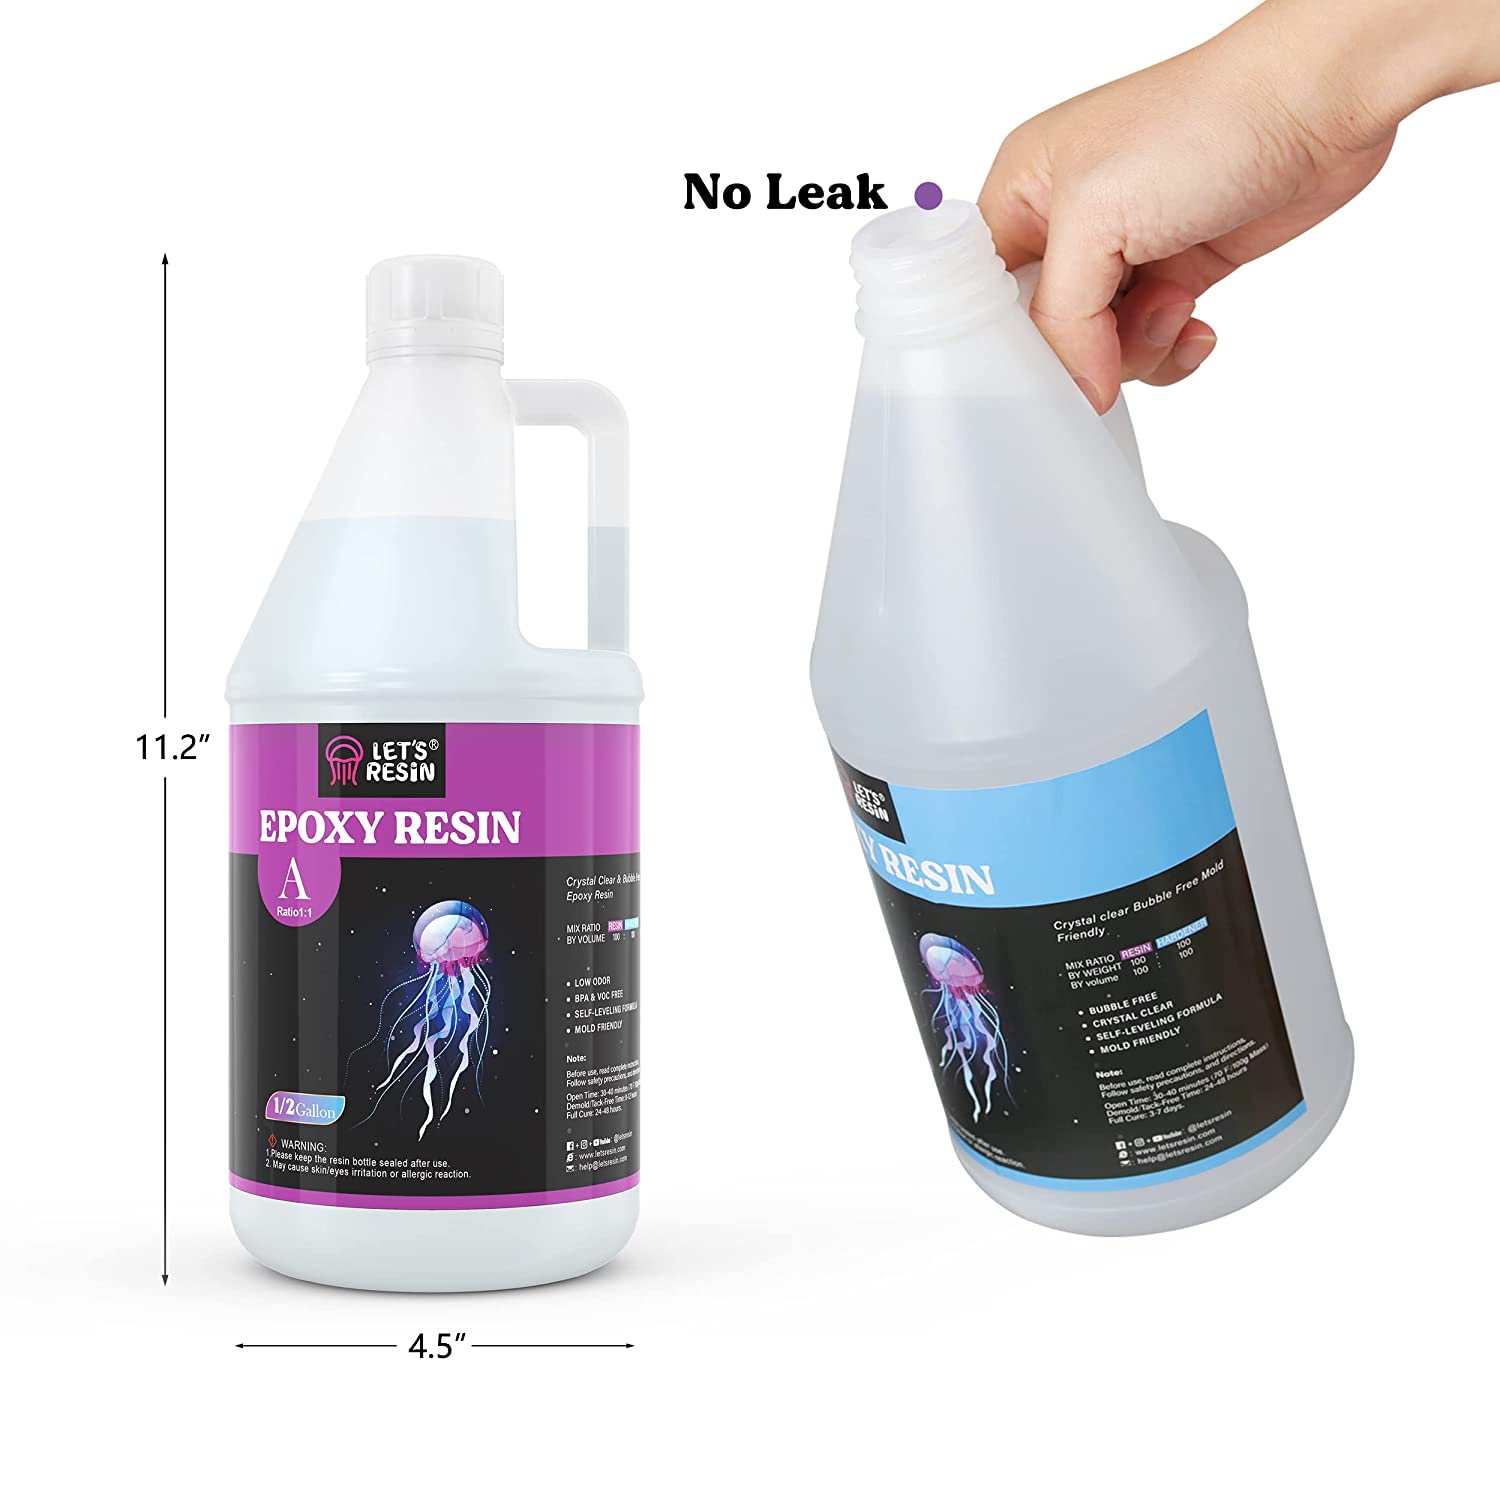 FUHITIM Epoxy Resin 2 Gallon - Crystal Clear Epoxy Resin Kit -  Self-Leveling, High-Glossy, No Yellowing, No Bubbles Casting Resin Perfect  for Crafts, Table Tops, DIY 1:1 Ratio